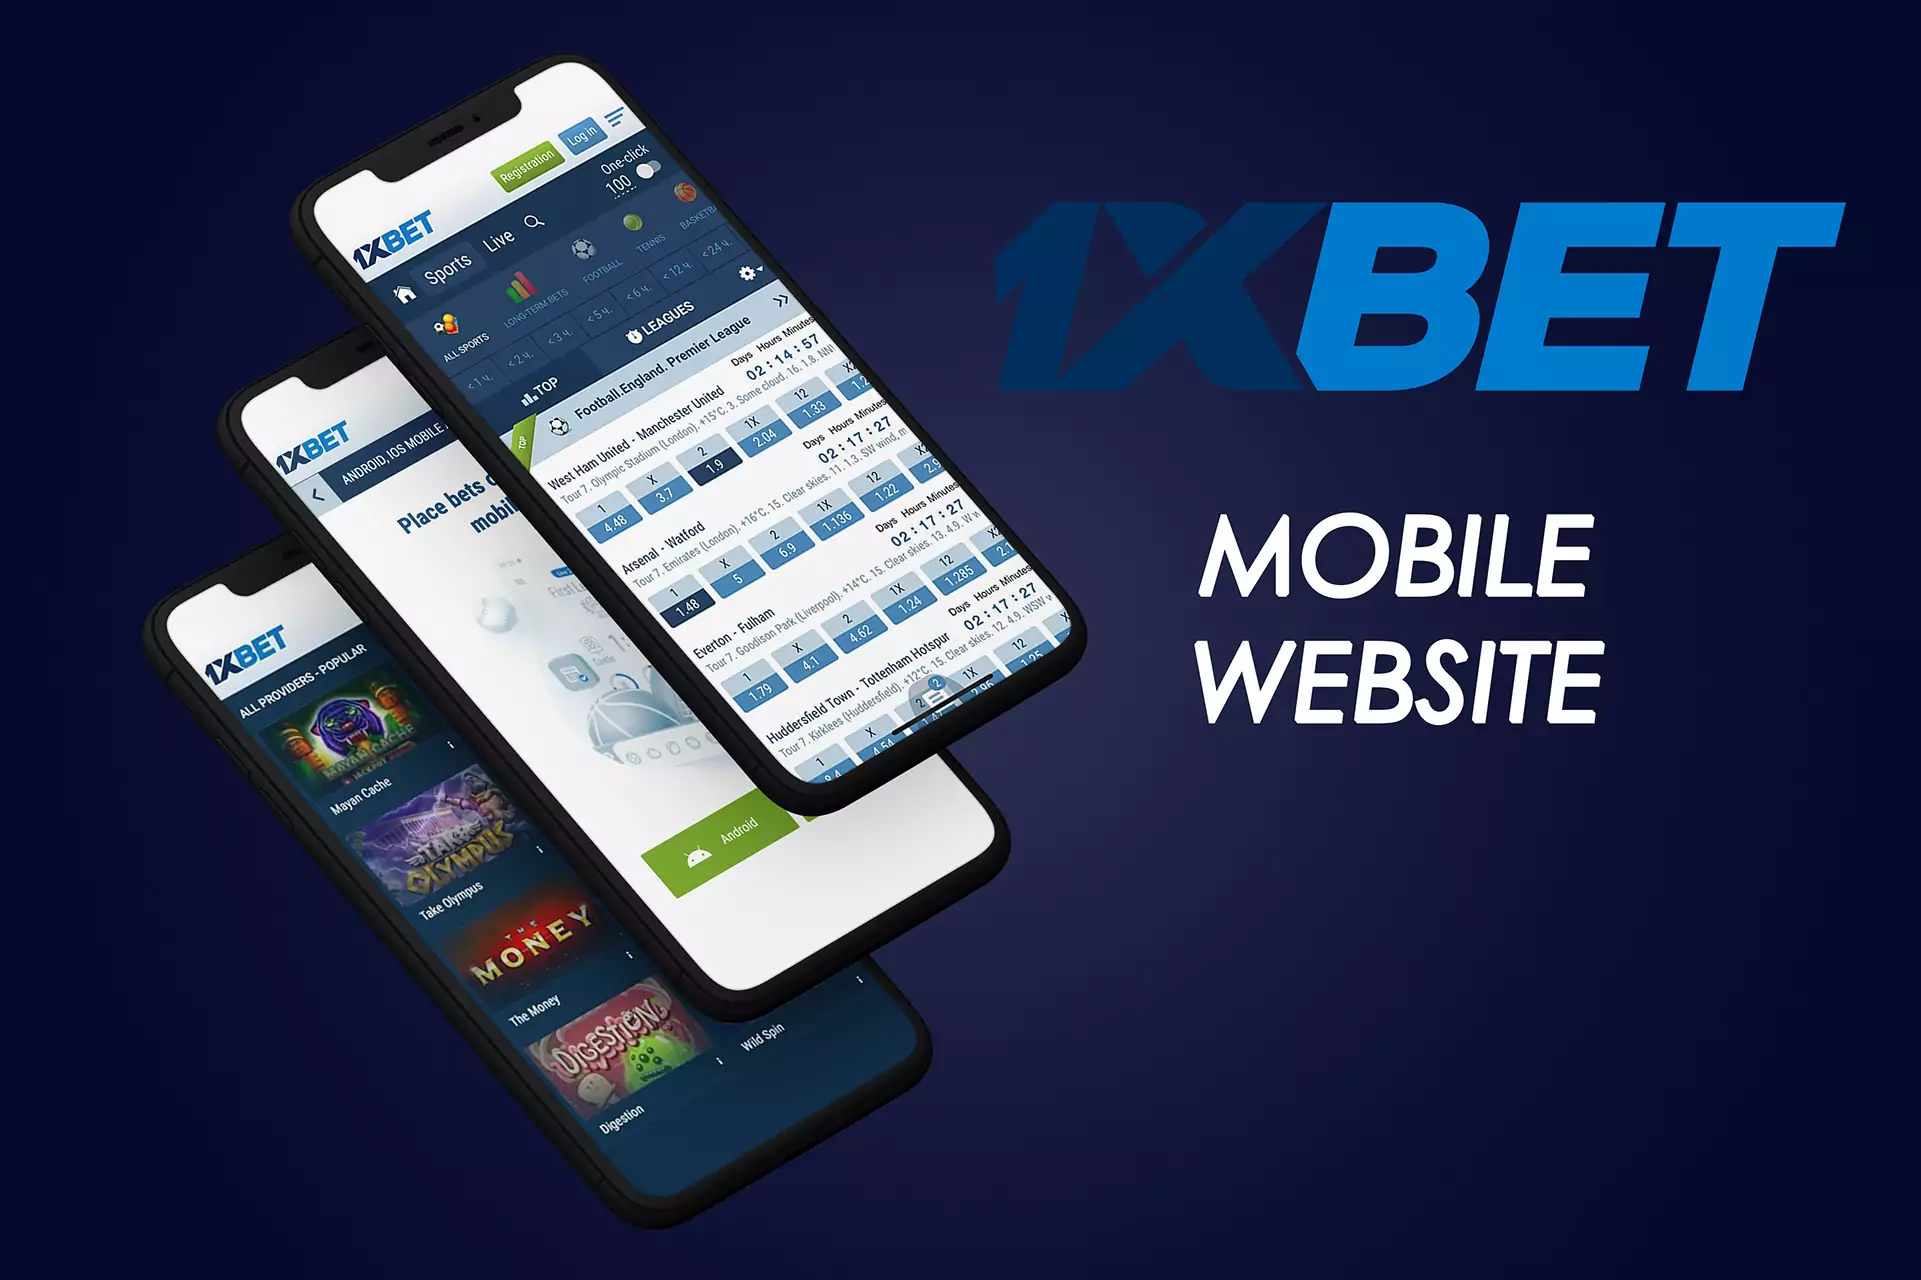 The functionality of the mobile version of the 1xBet website does not differ from the mobile app.